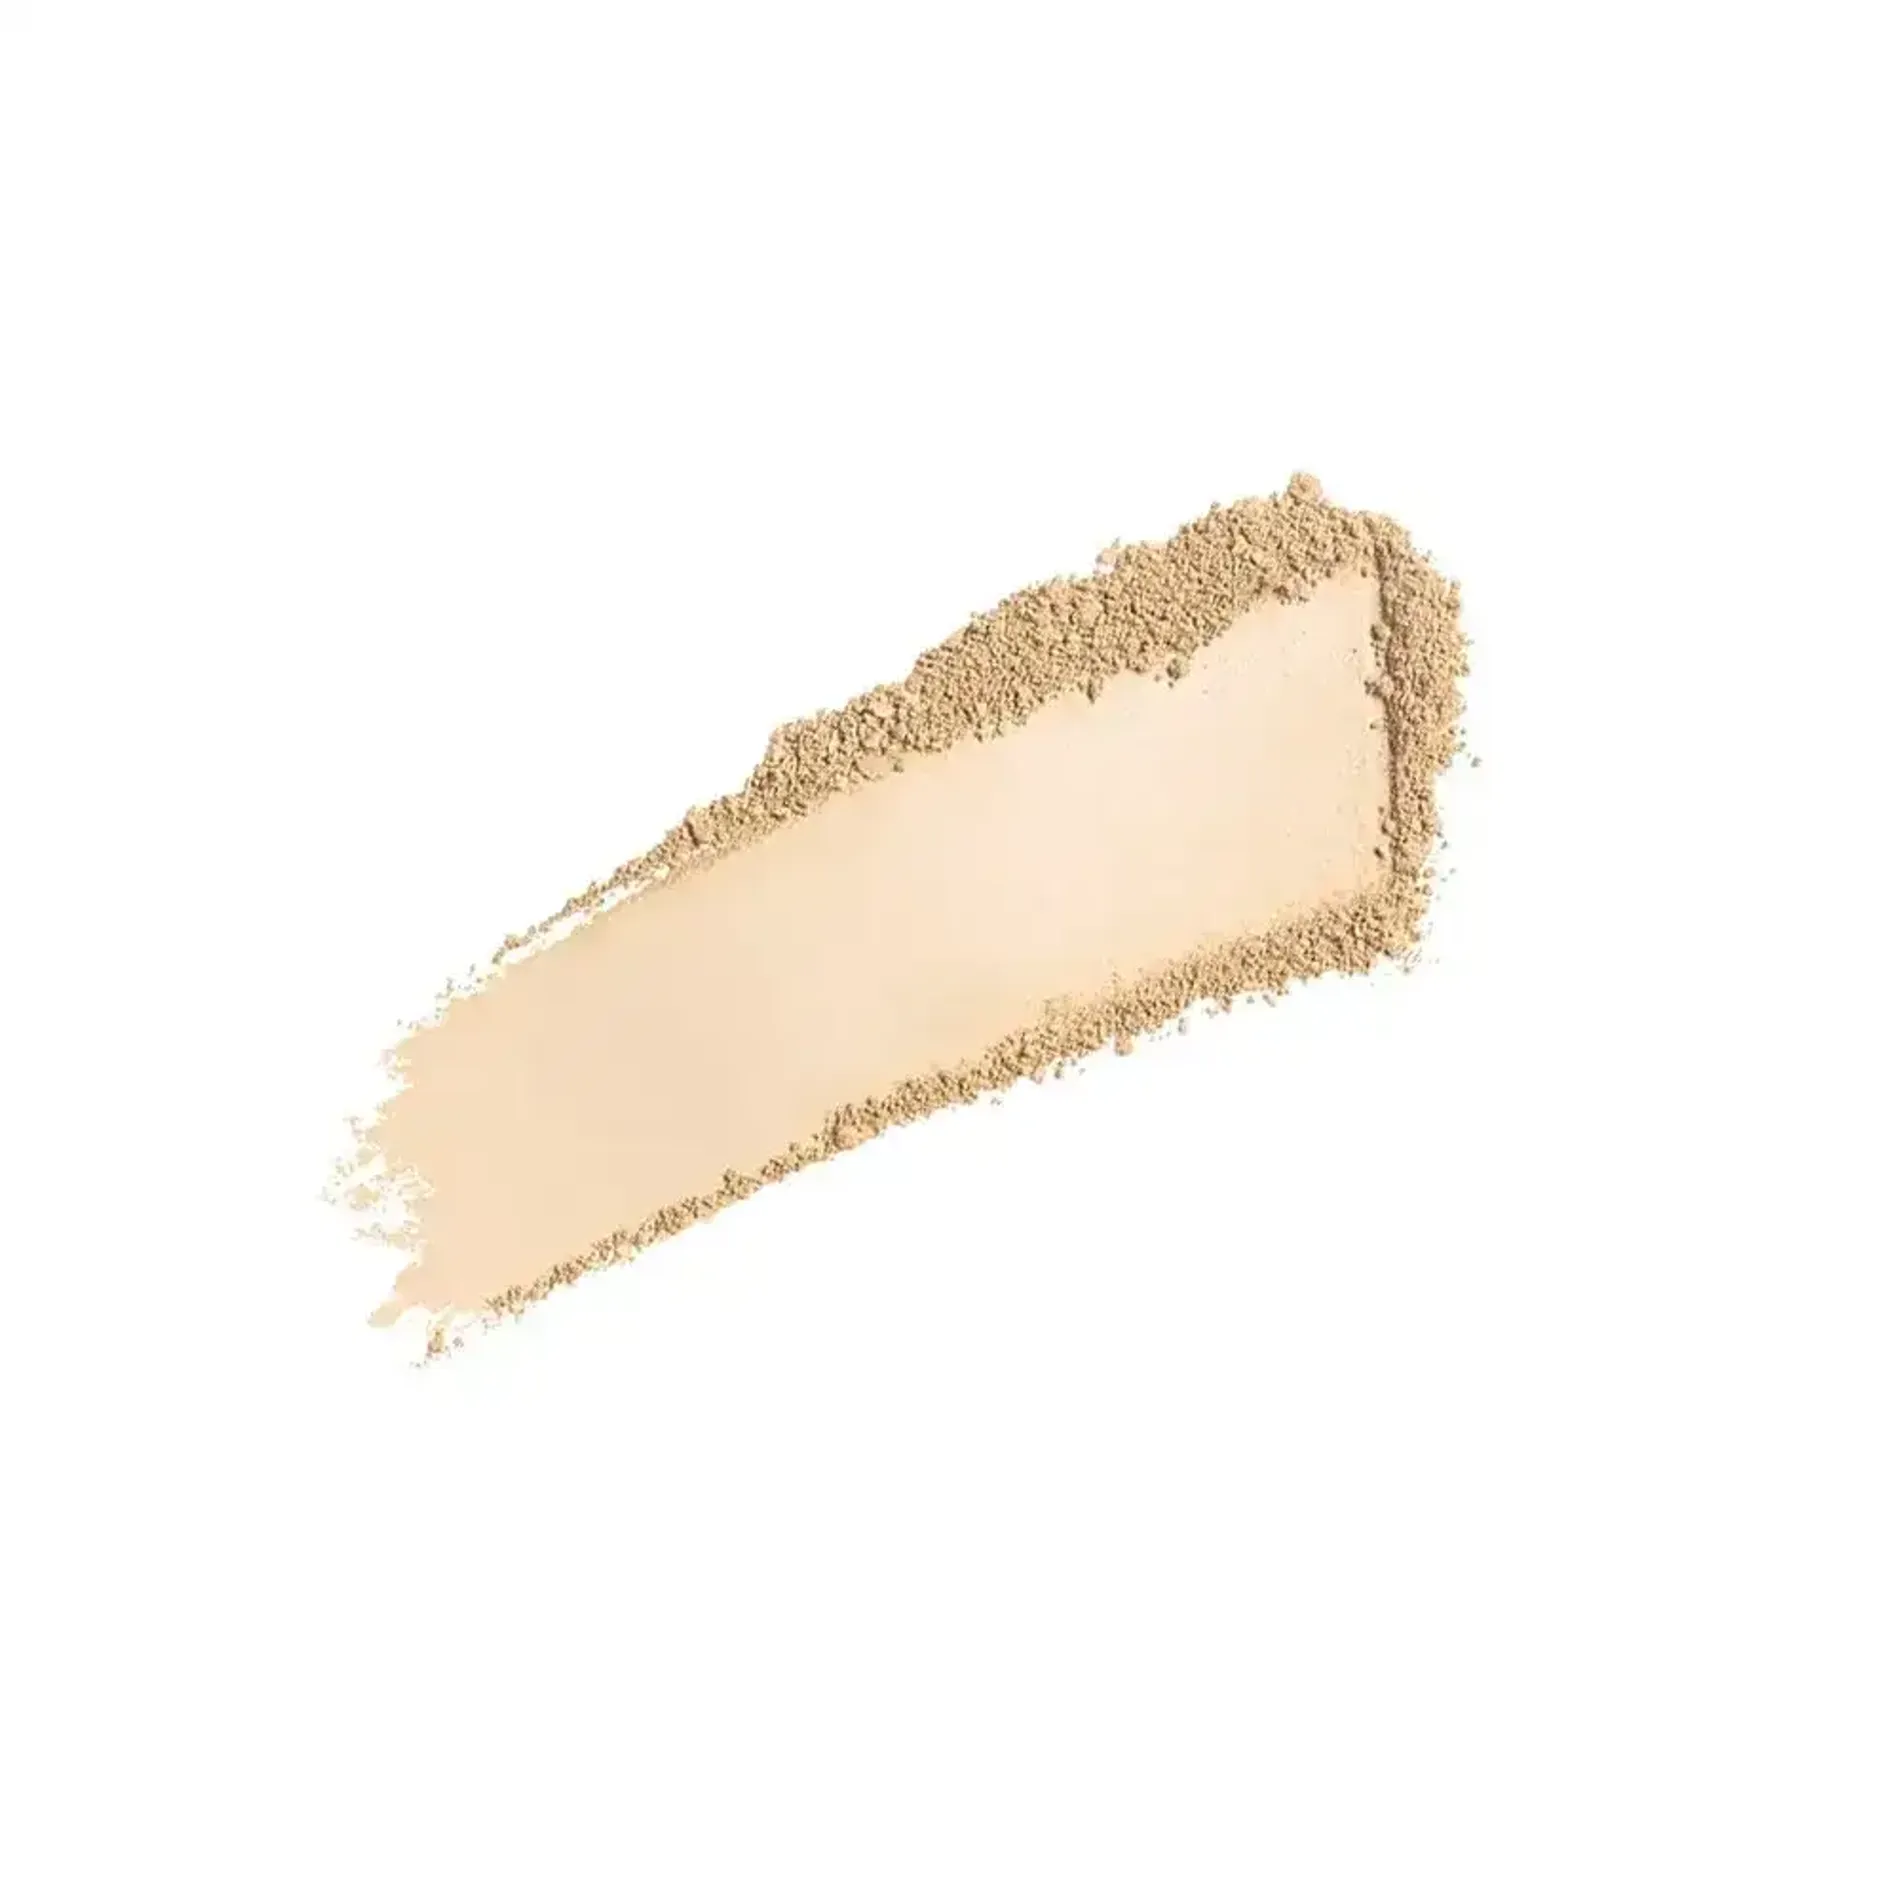 phan-phu-estee-lauder-double-wear-stay-in-place-matte-powder-foundation-12g-3